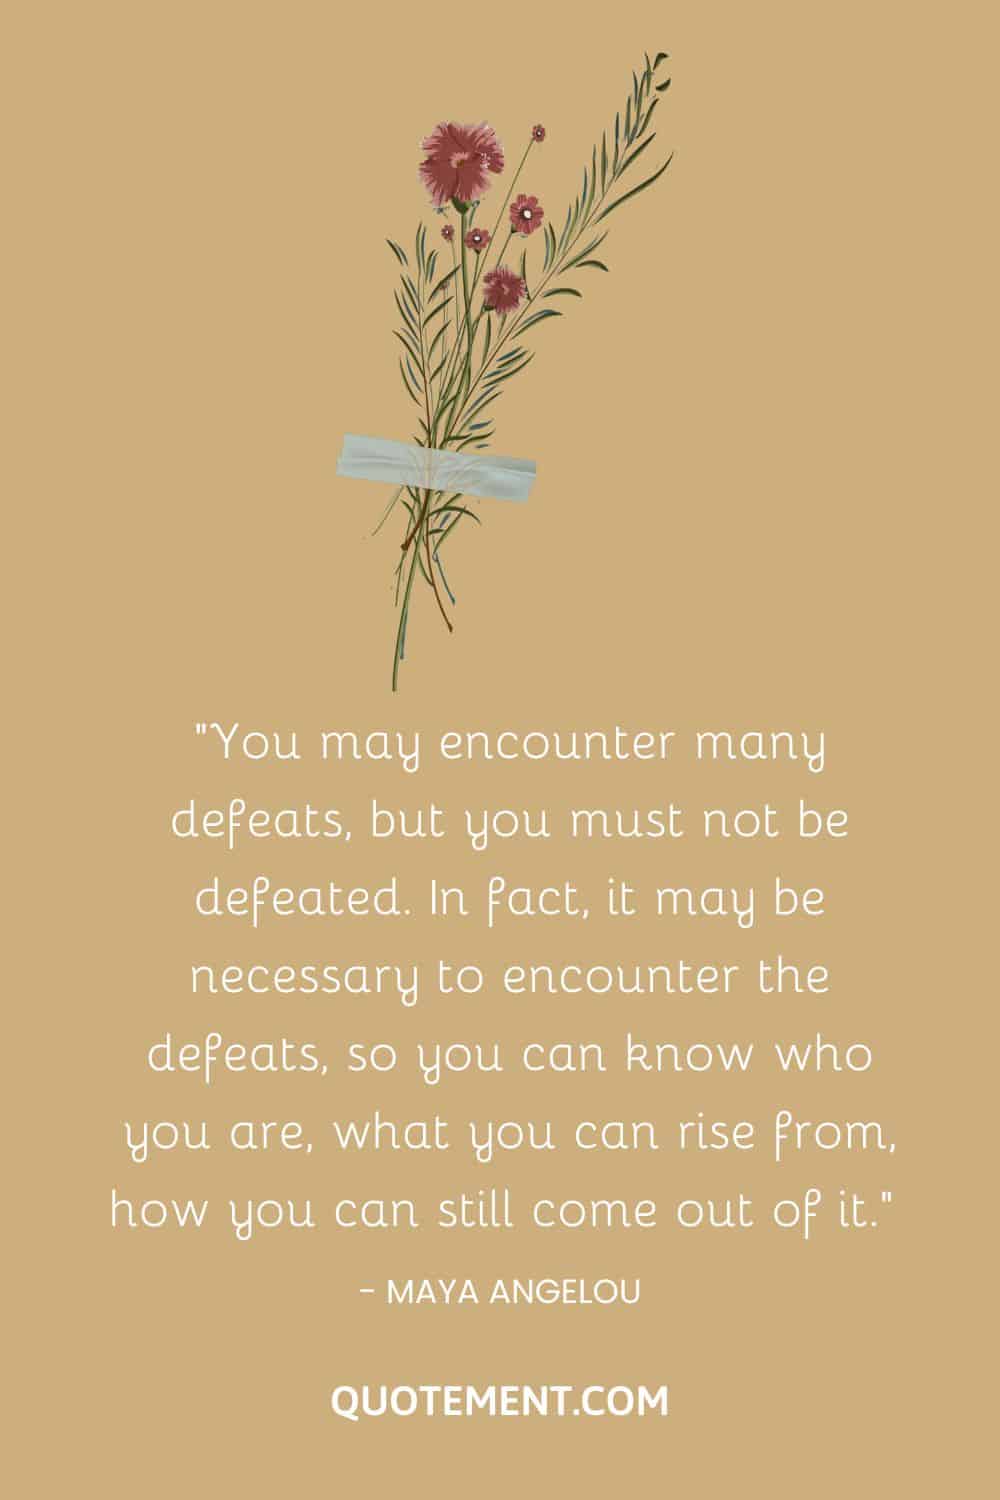 You may encounter many defeats, but you must not be defeated